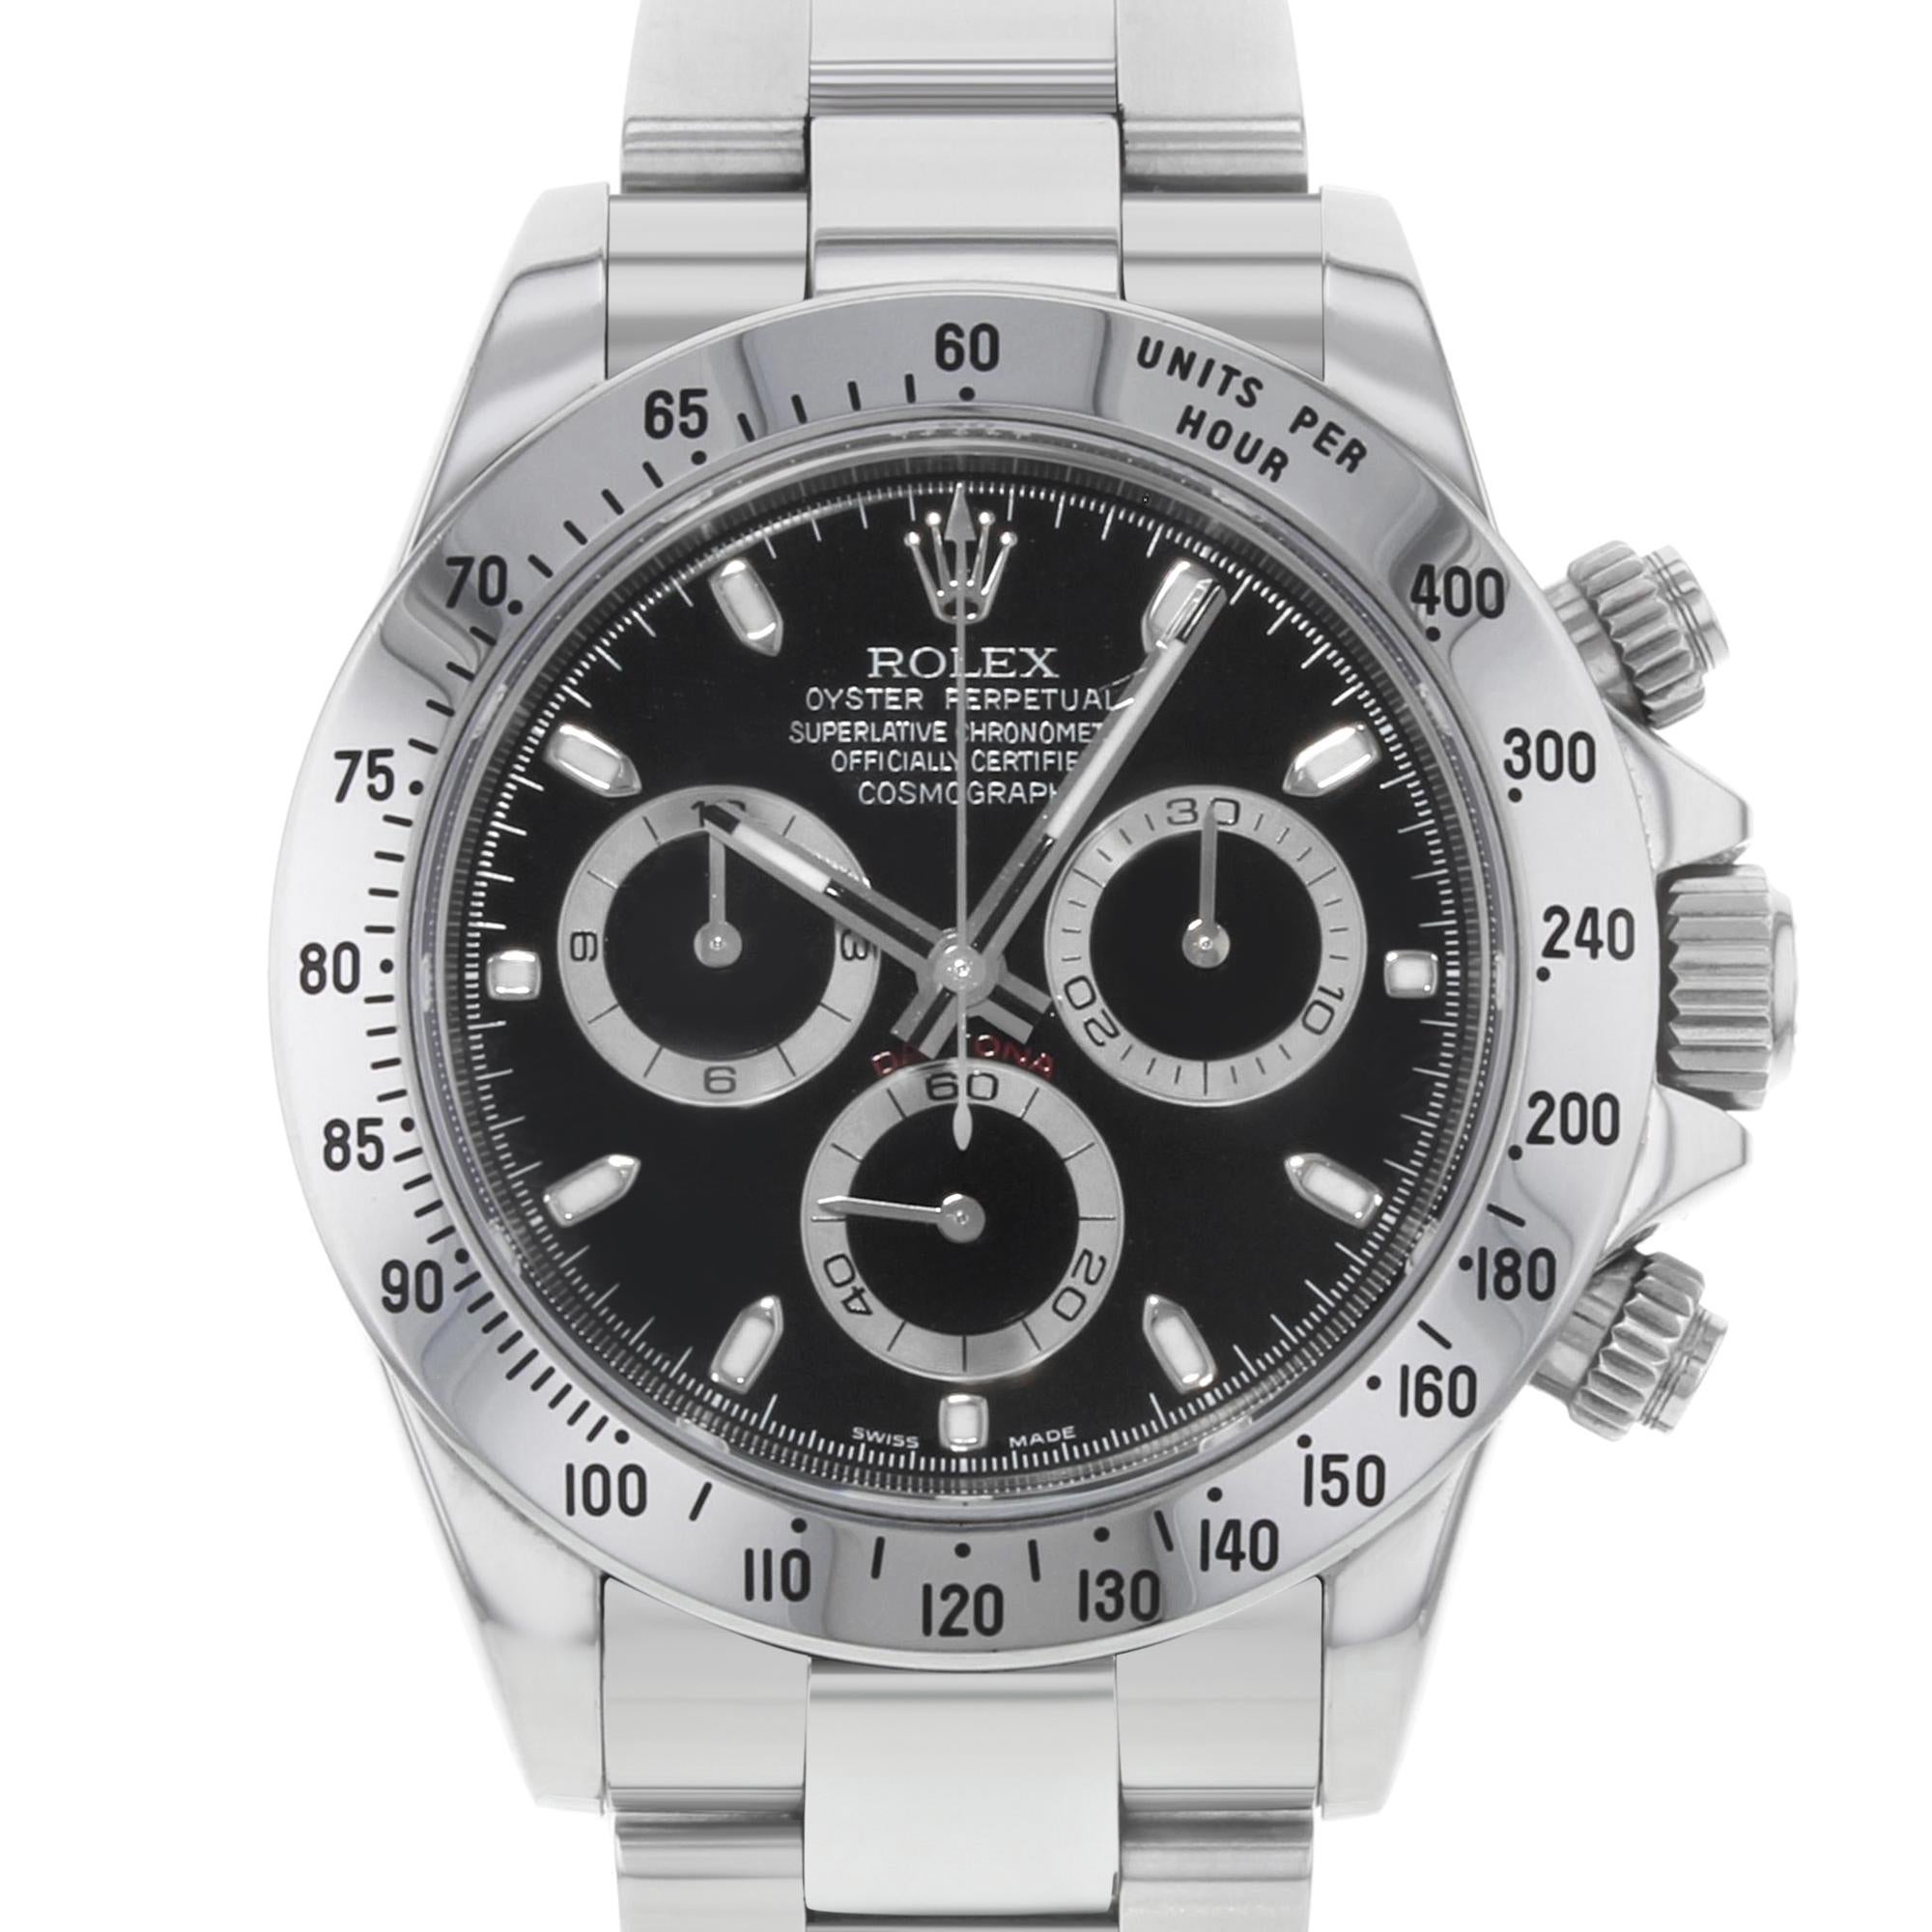 Rolex Daytona 116250 Black Index Dial Stainless Steel Automatic Men's Watch